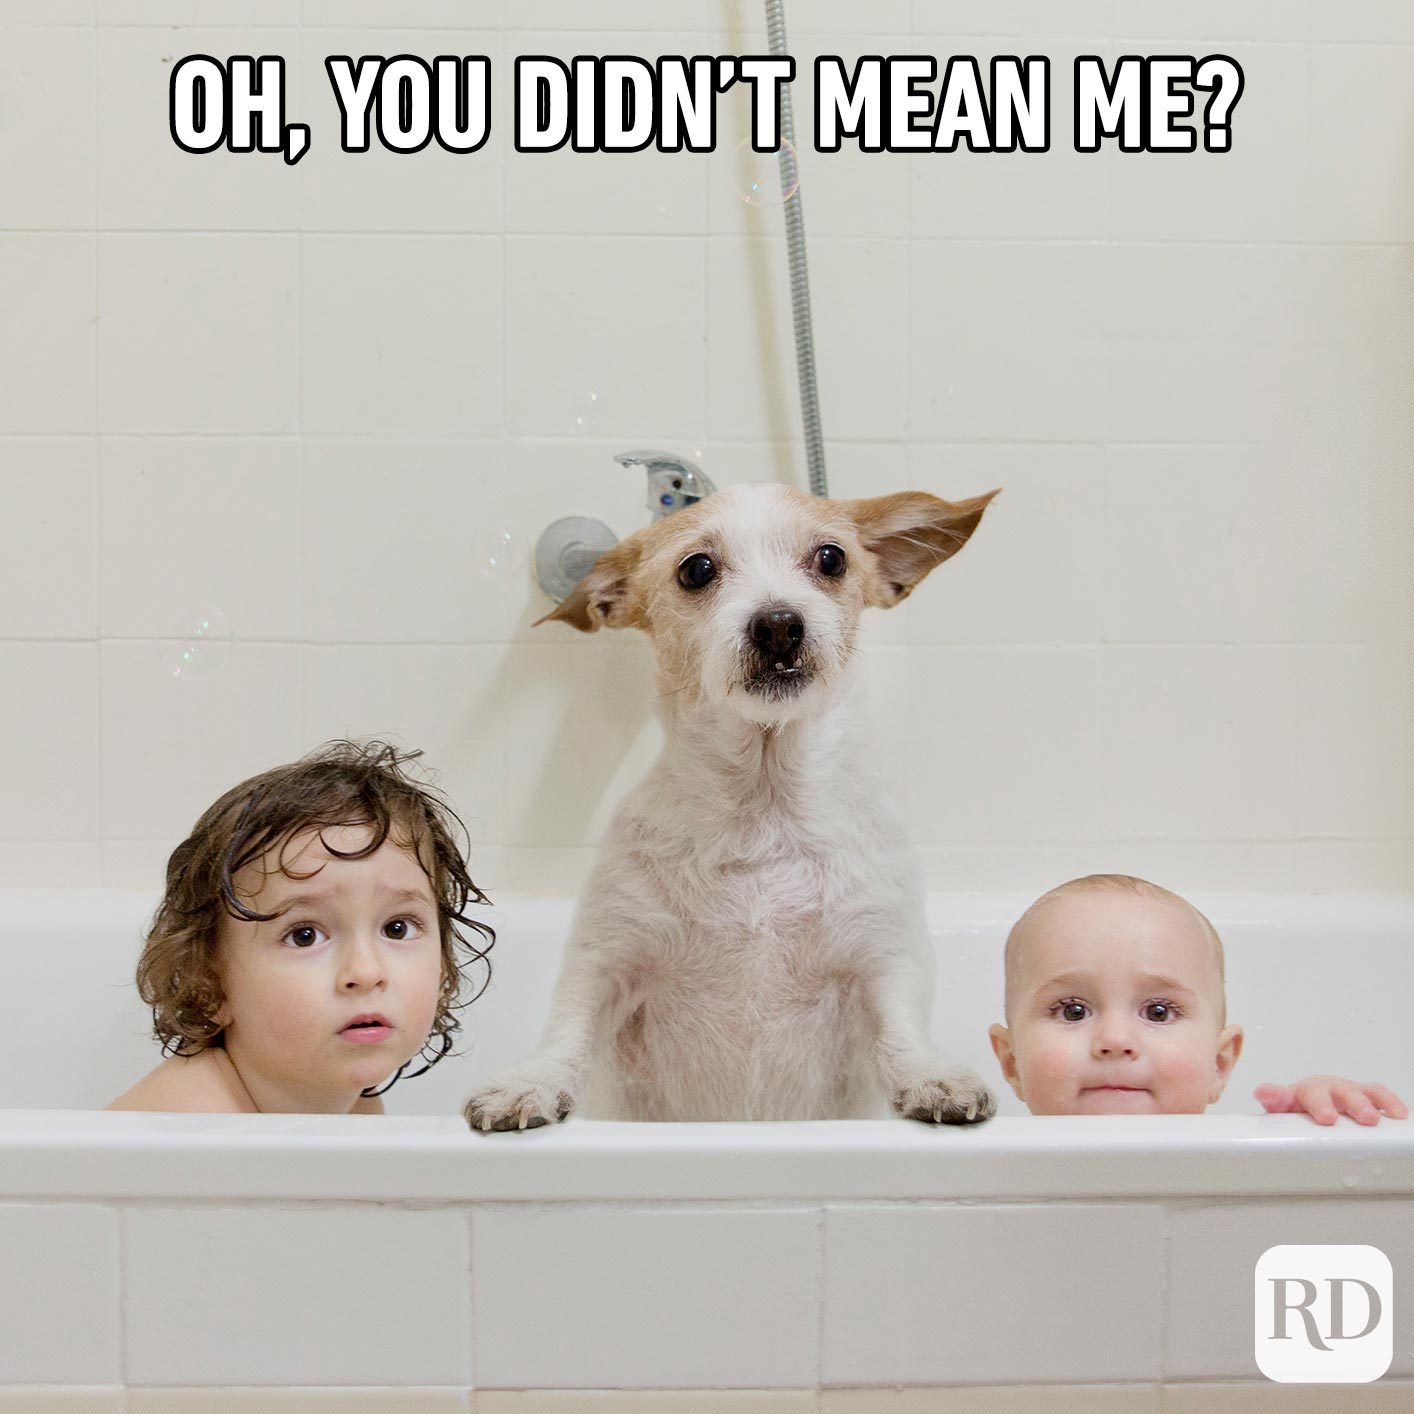 Dog beside two children in bathtub. Meme text: Oh, you didn’t mean me?